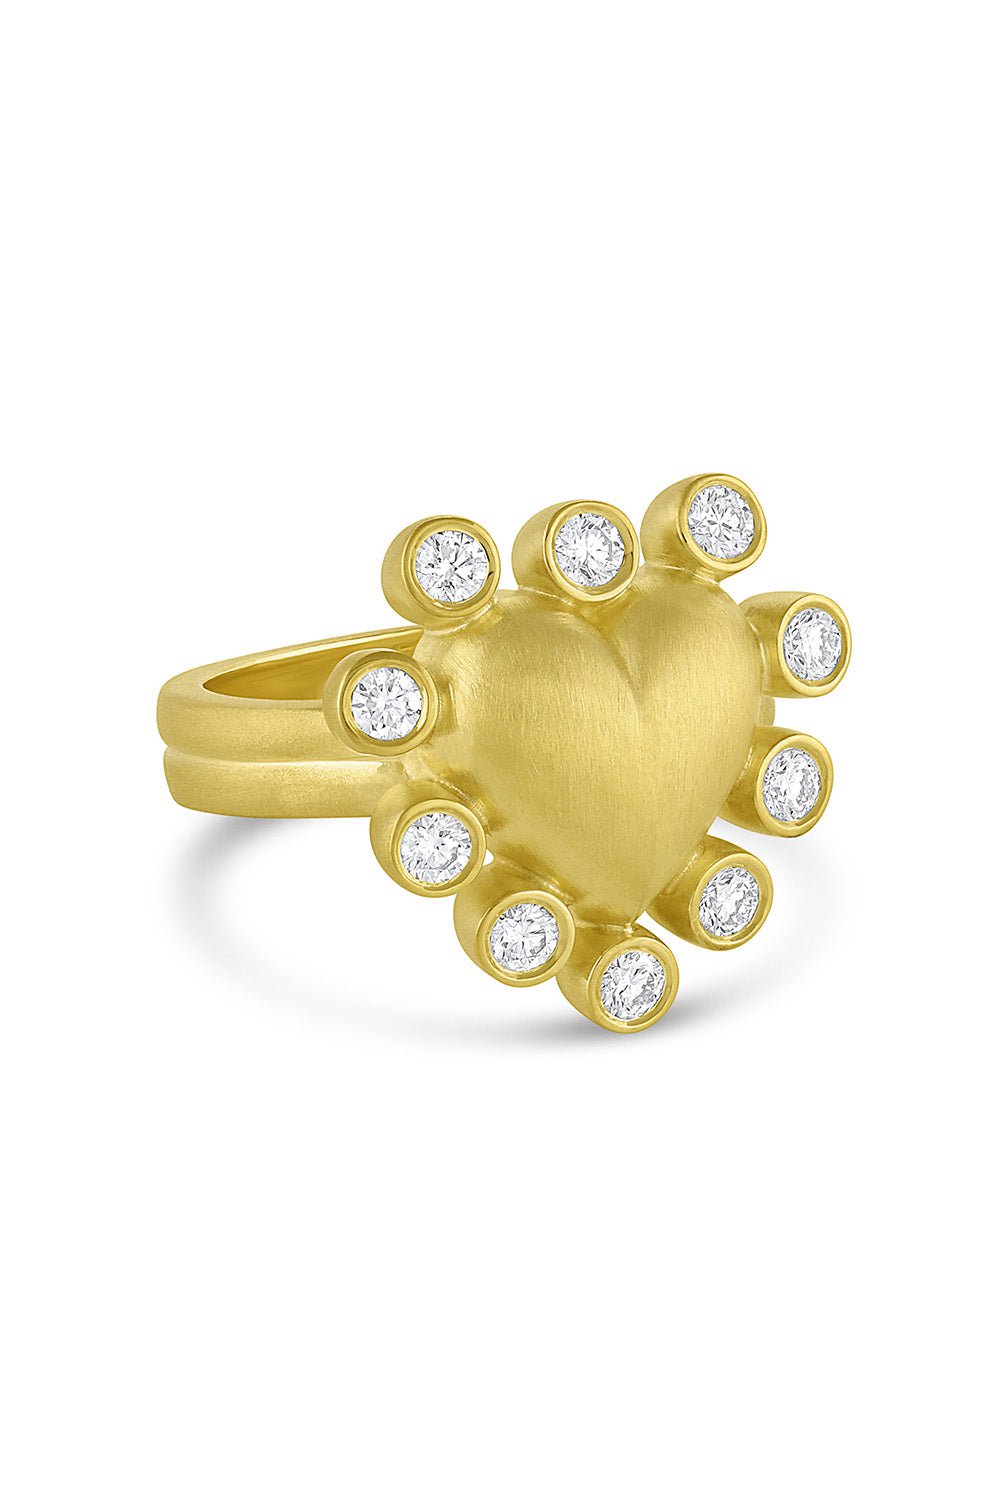 Essential Colors Heart Ring JEWELRYFINE JEWELRING LEIGH MAXWELL   